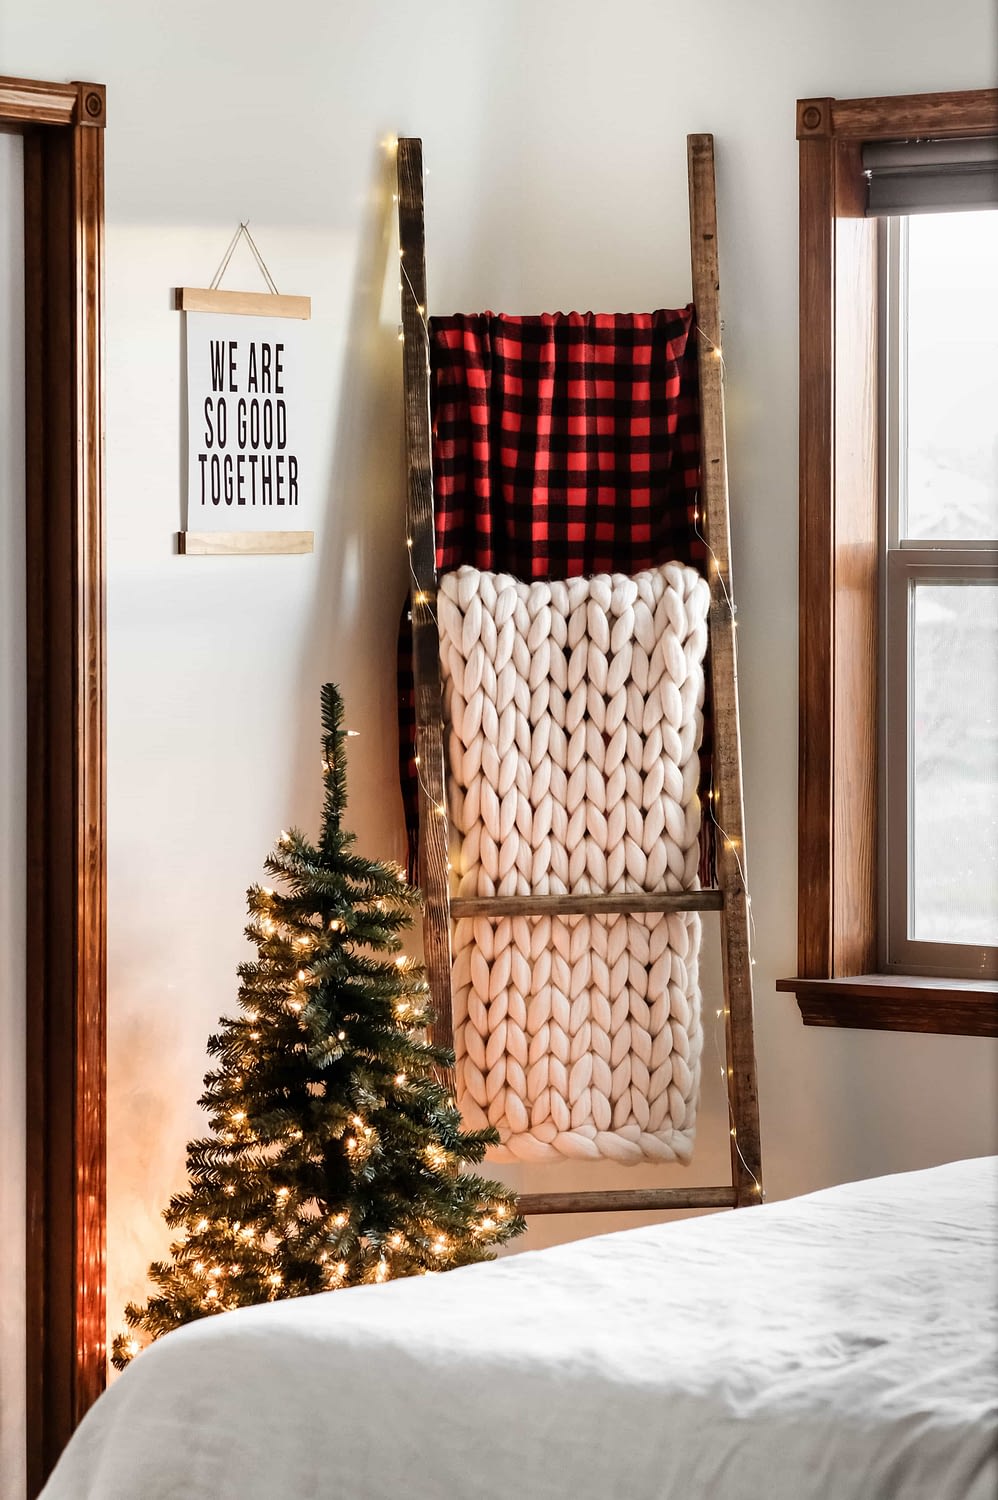 A blanket ladder holding a white woven blanket, and a red buffalo check blanket